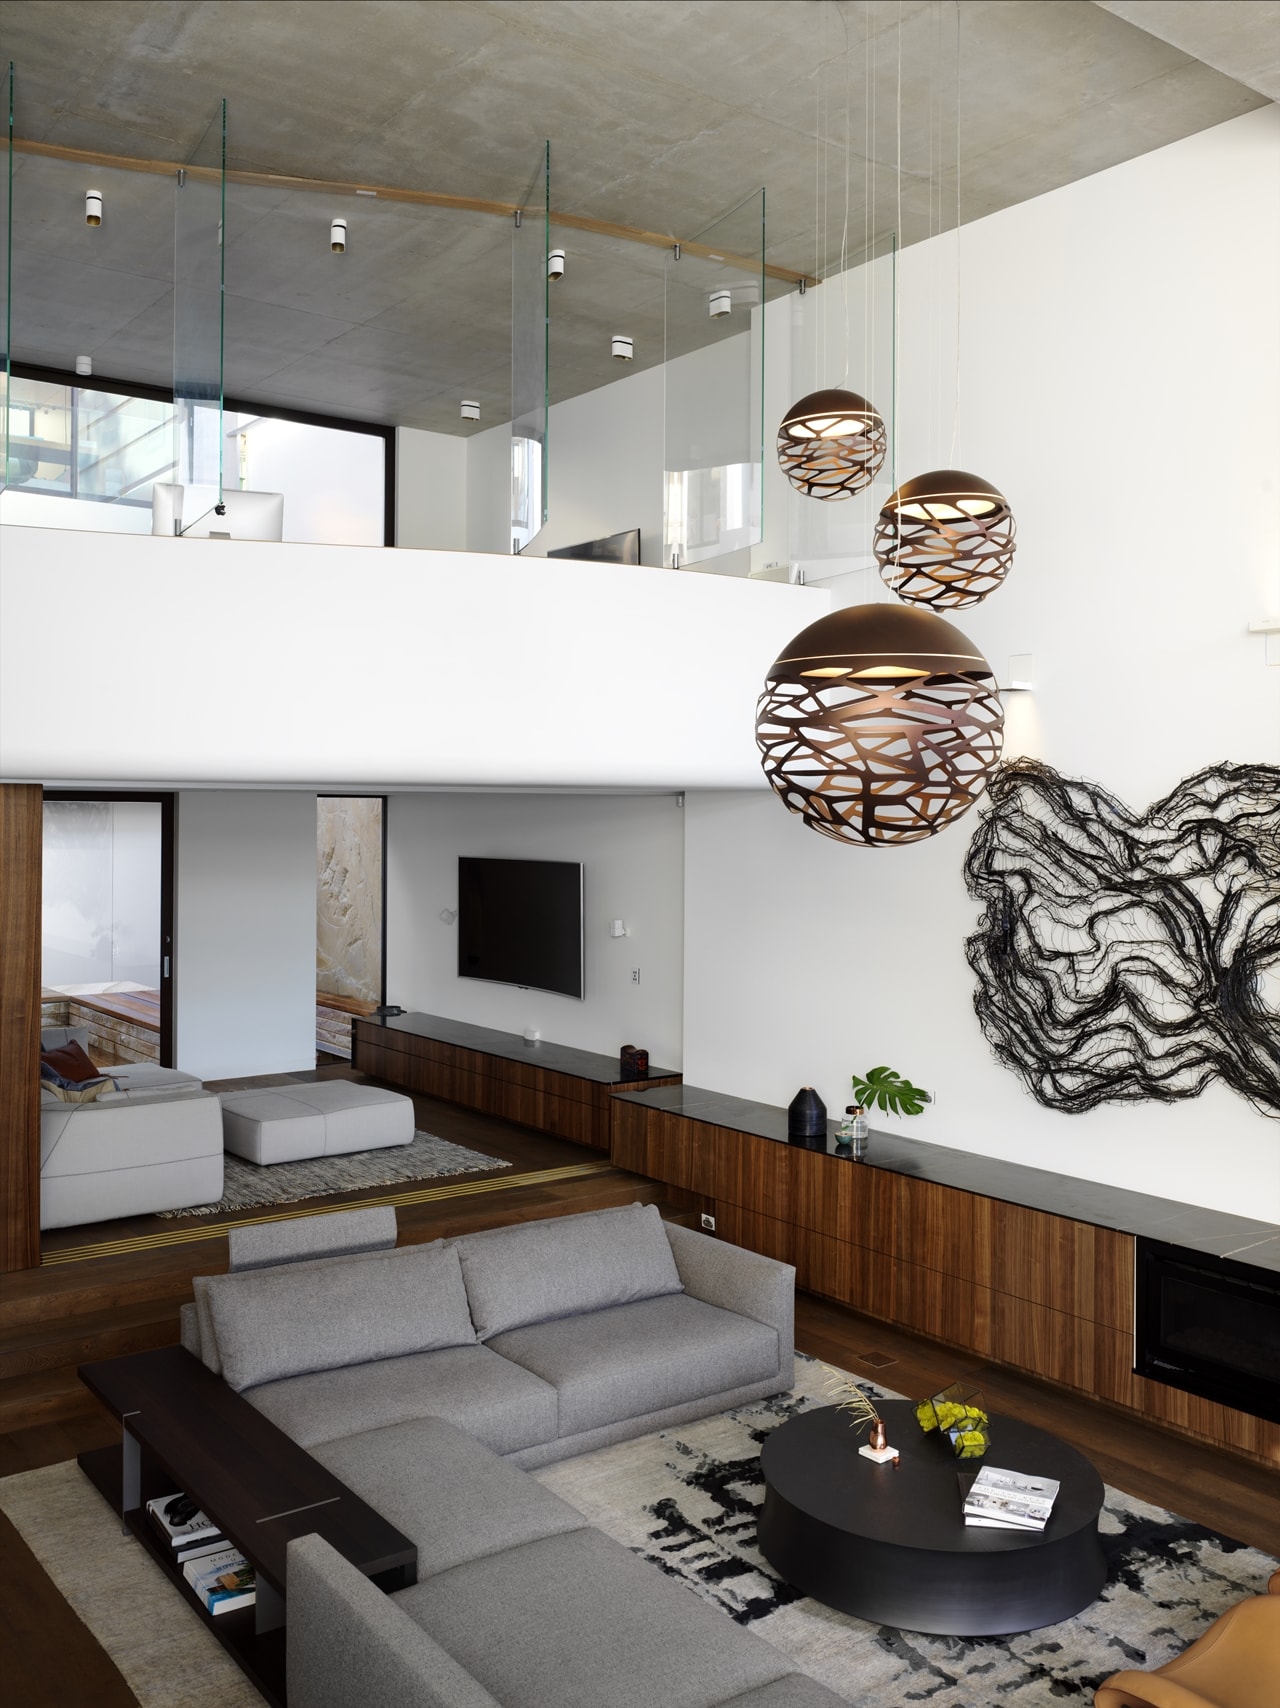 Double height living room with interior glass walls in hillside house designed by Rolf Ockert